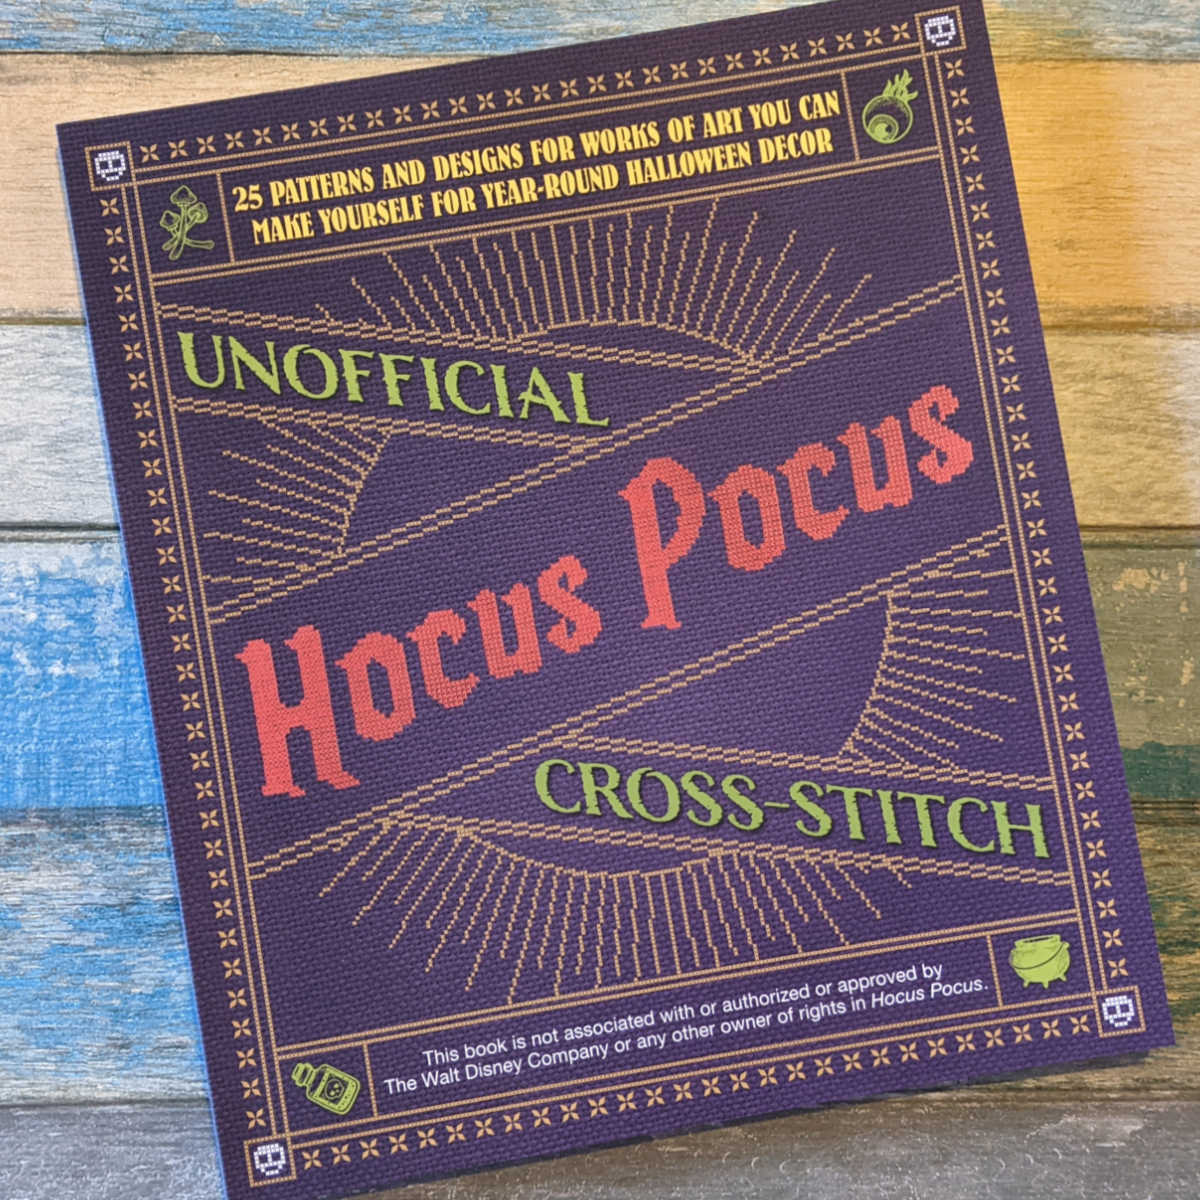 Fans of the movies will love getting crafty with the Unofficial Hocus Pocus cross stitch pattern book from Ulysses Press. 